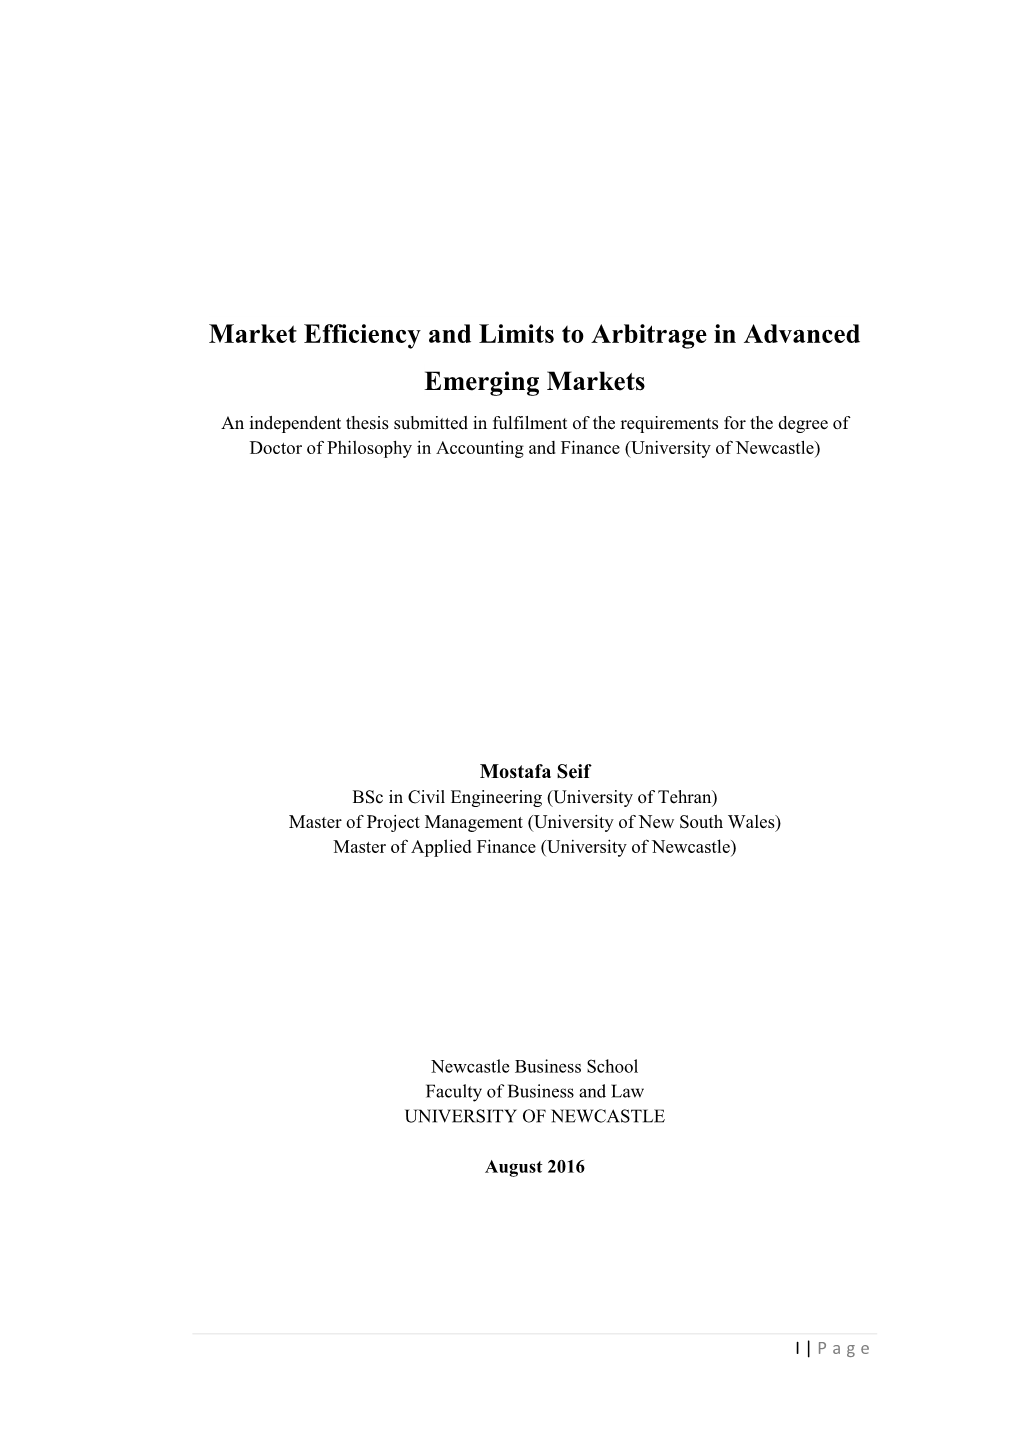 Market Efficiency and Limits to Arbitrage in Advanced Emerging